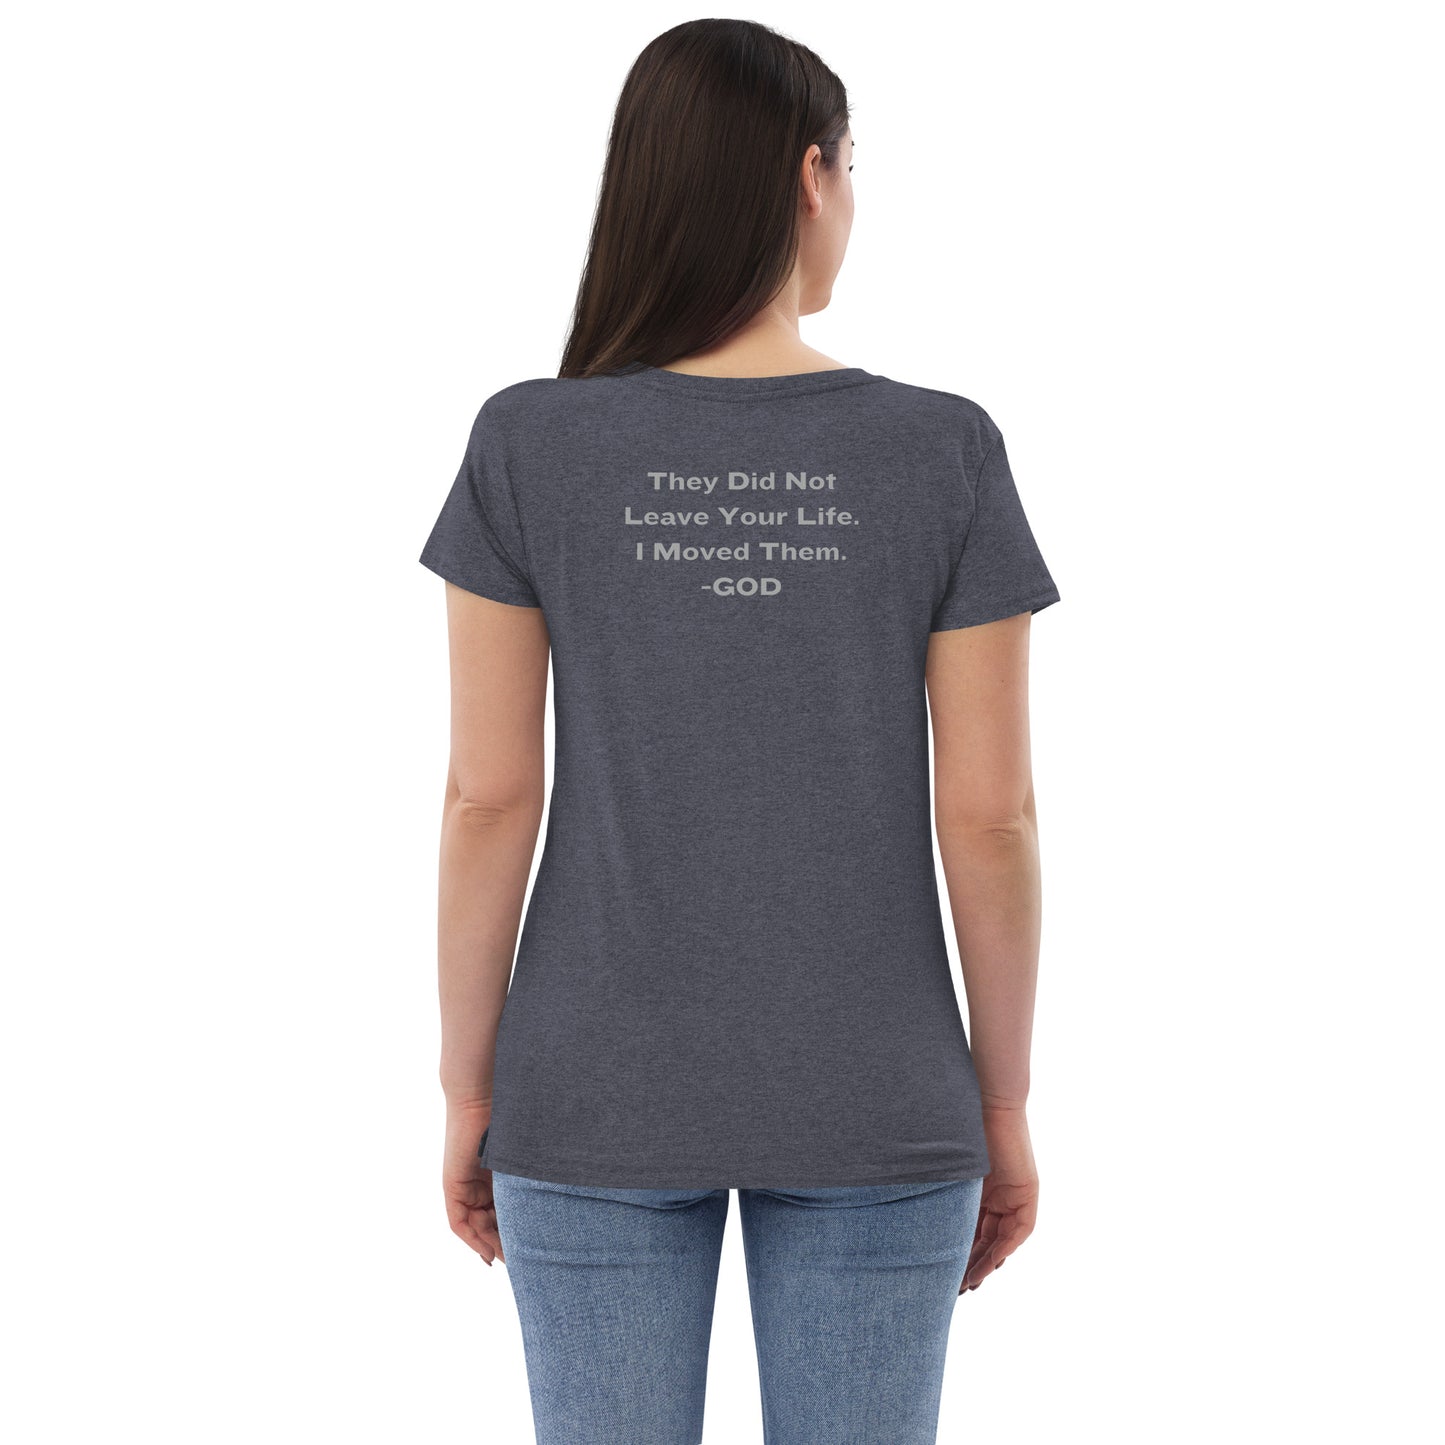 They Did Not Leave Your Life. I Moved Them. - GOD Women’s Recycled V-Neck T-Shirt